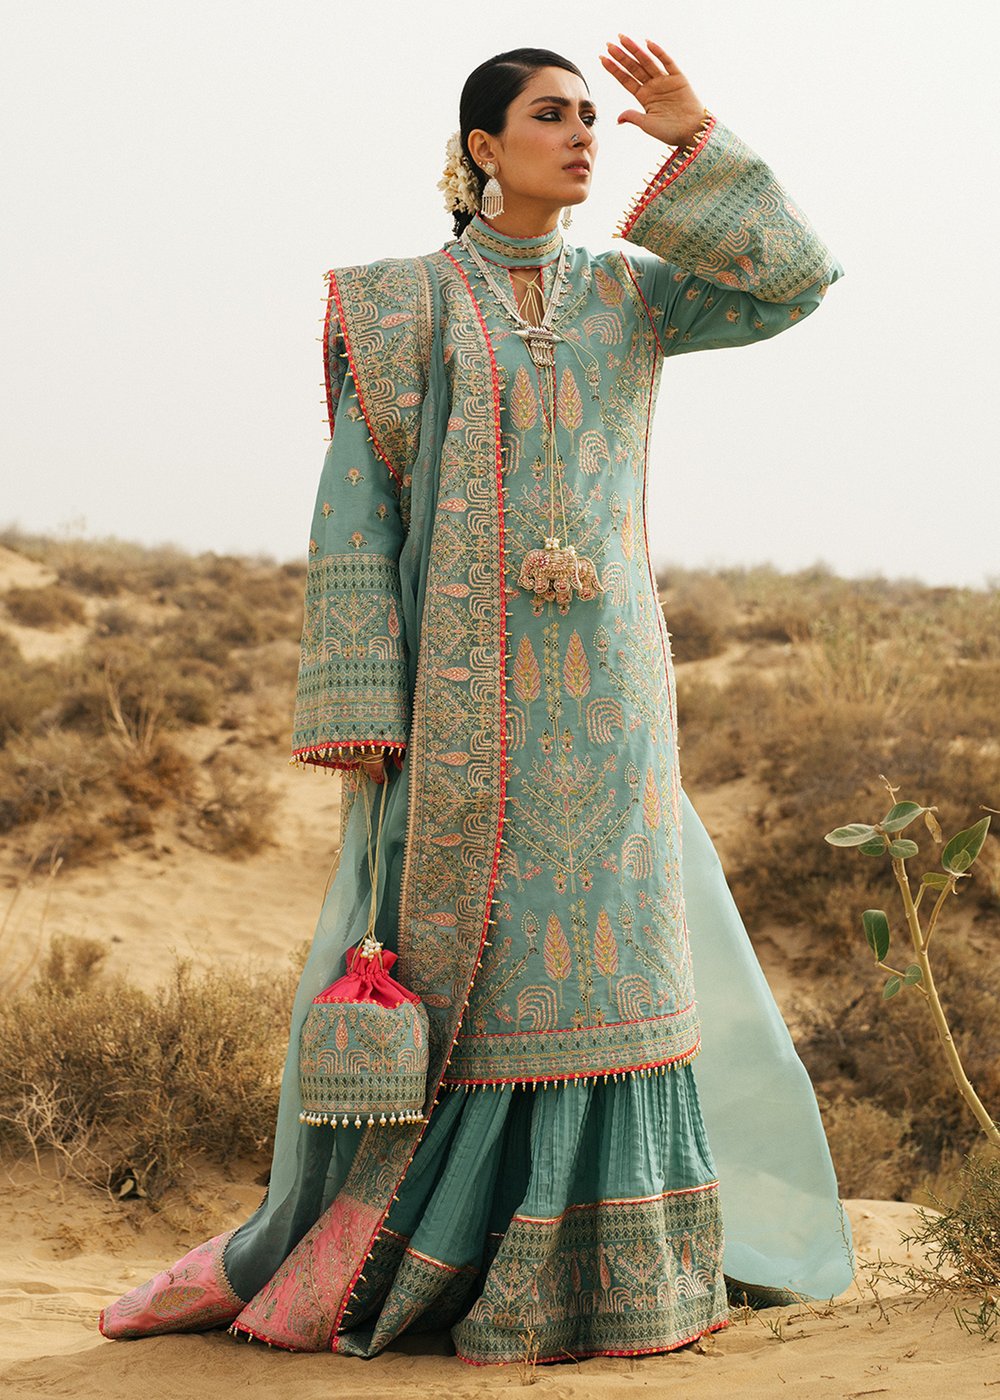 HUSSAIN REHAR | ROHI DE NAAL | Saloni (Ice Blue) Lawn dress is extremely trending for HUSAIN REHAR 2021 lawn. The PAKISTANI DRESSES IN UK are available for this wedding season. Get the exclusive customized Maria B, Asim Jofa Bridal, PAKISTANI DRESSES from our PAKISTANI BOUTIQUE in UK, USA, Austria from Lebaasonline 